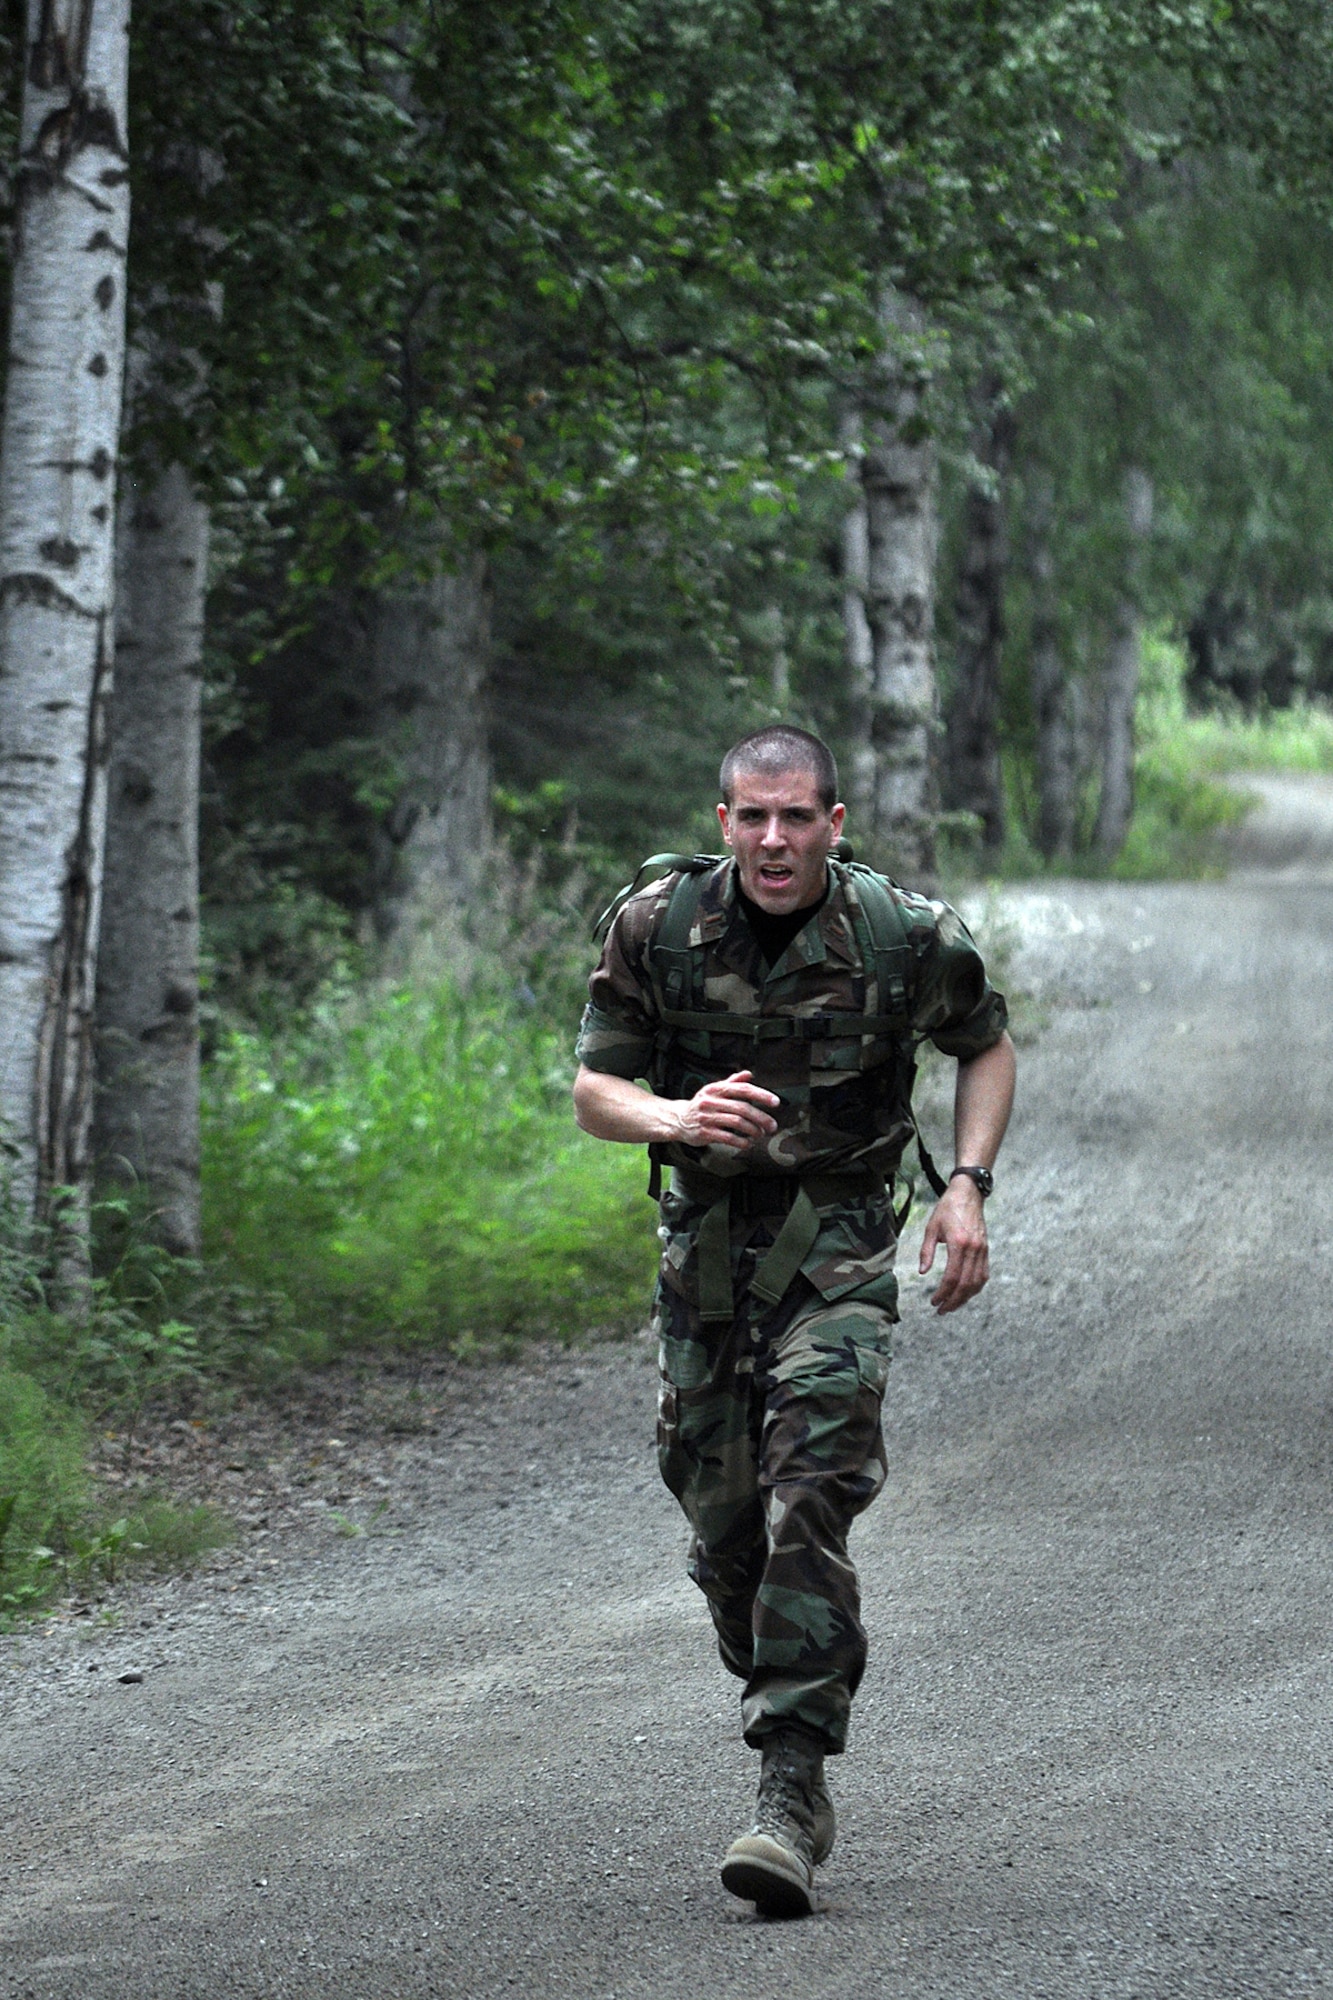 FORT RICHARDSON, Alaska -- 2nd Lt. Chad Herner, 732nd Air Mobility Squadron, heads for the home stretch July 17 in the canoe and run event of the Combat Cross-Country Series. (U.S. Army photo/John Pennell)